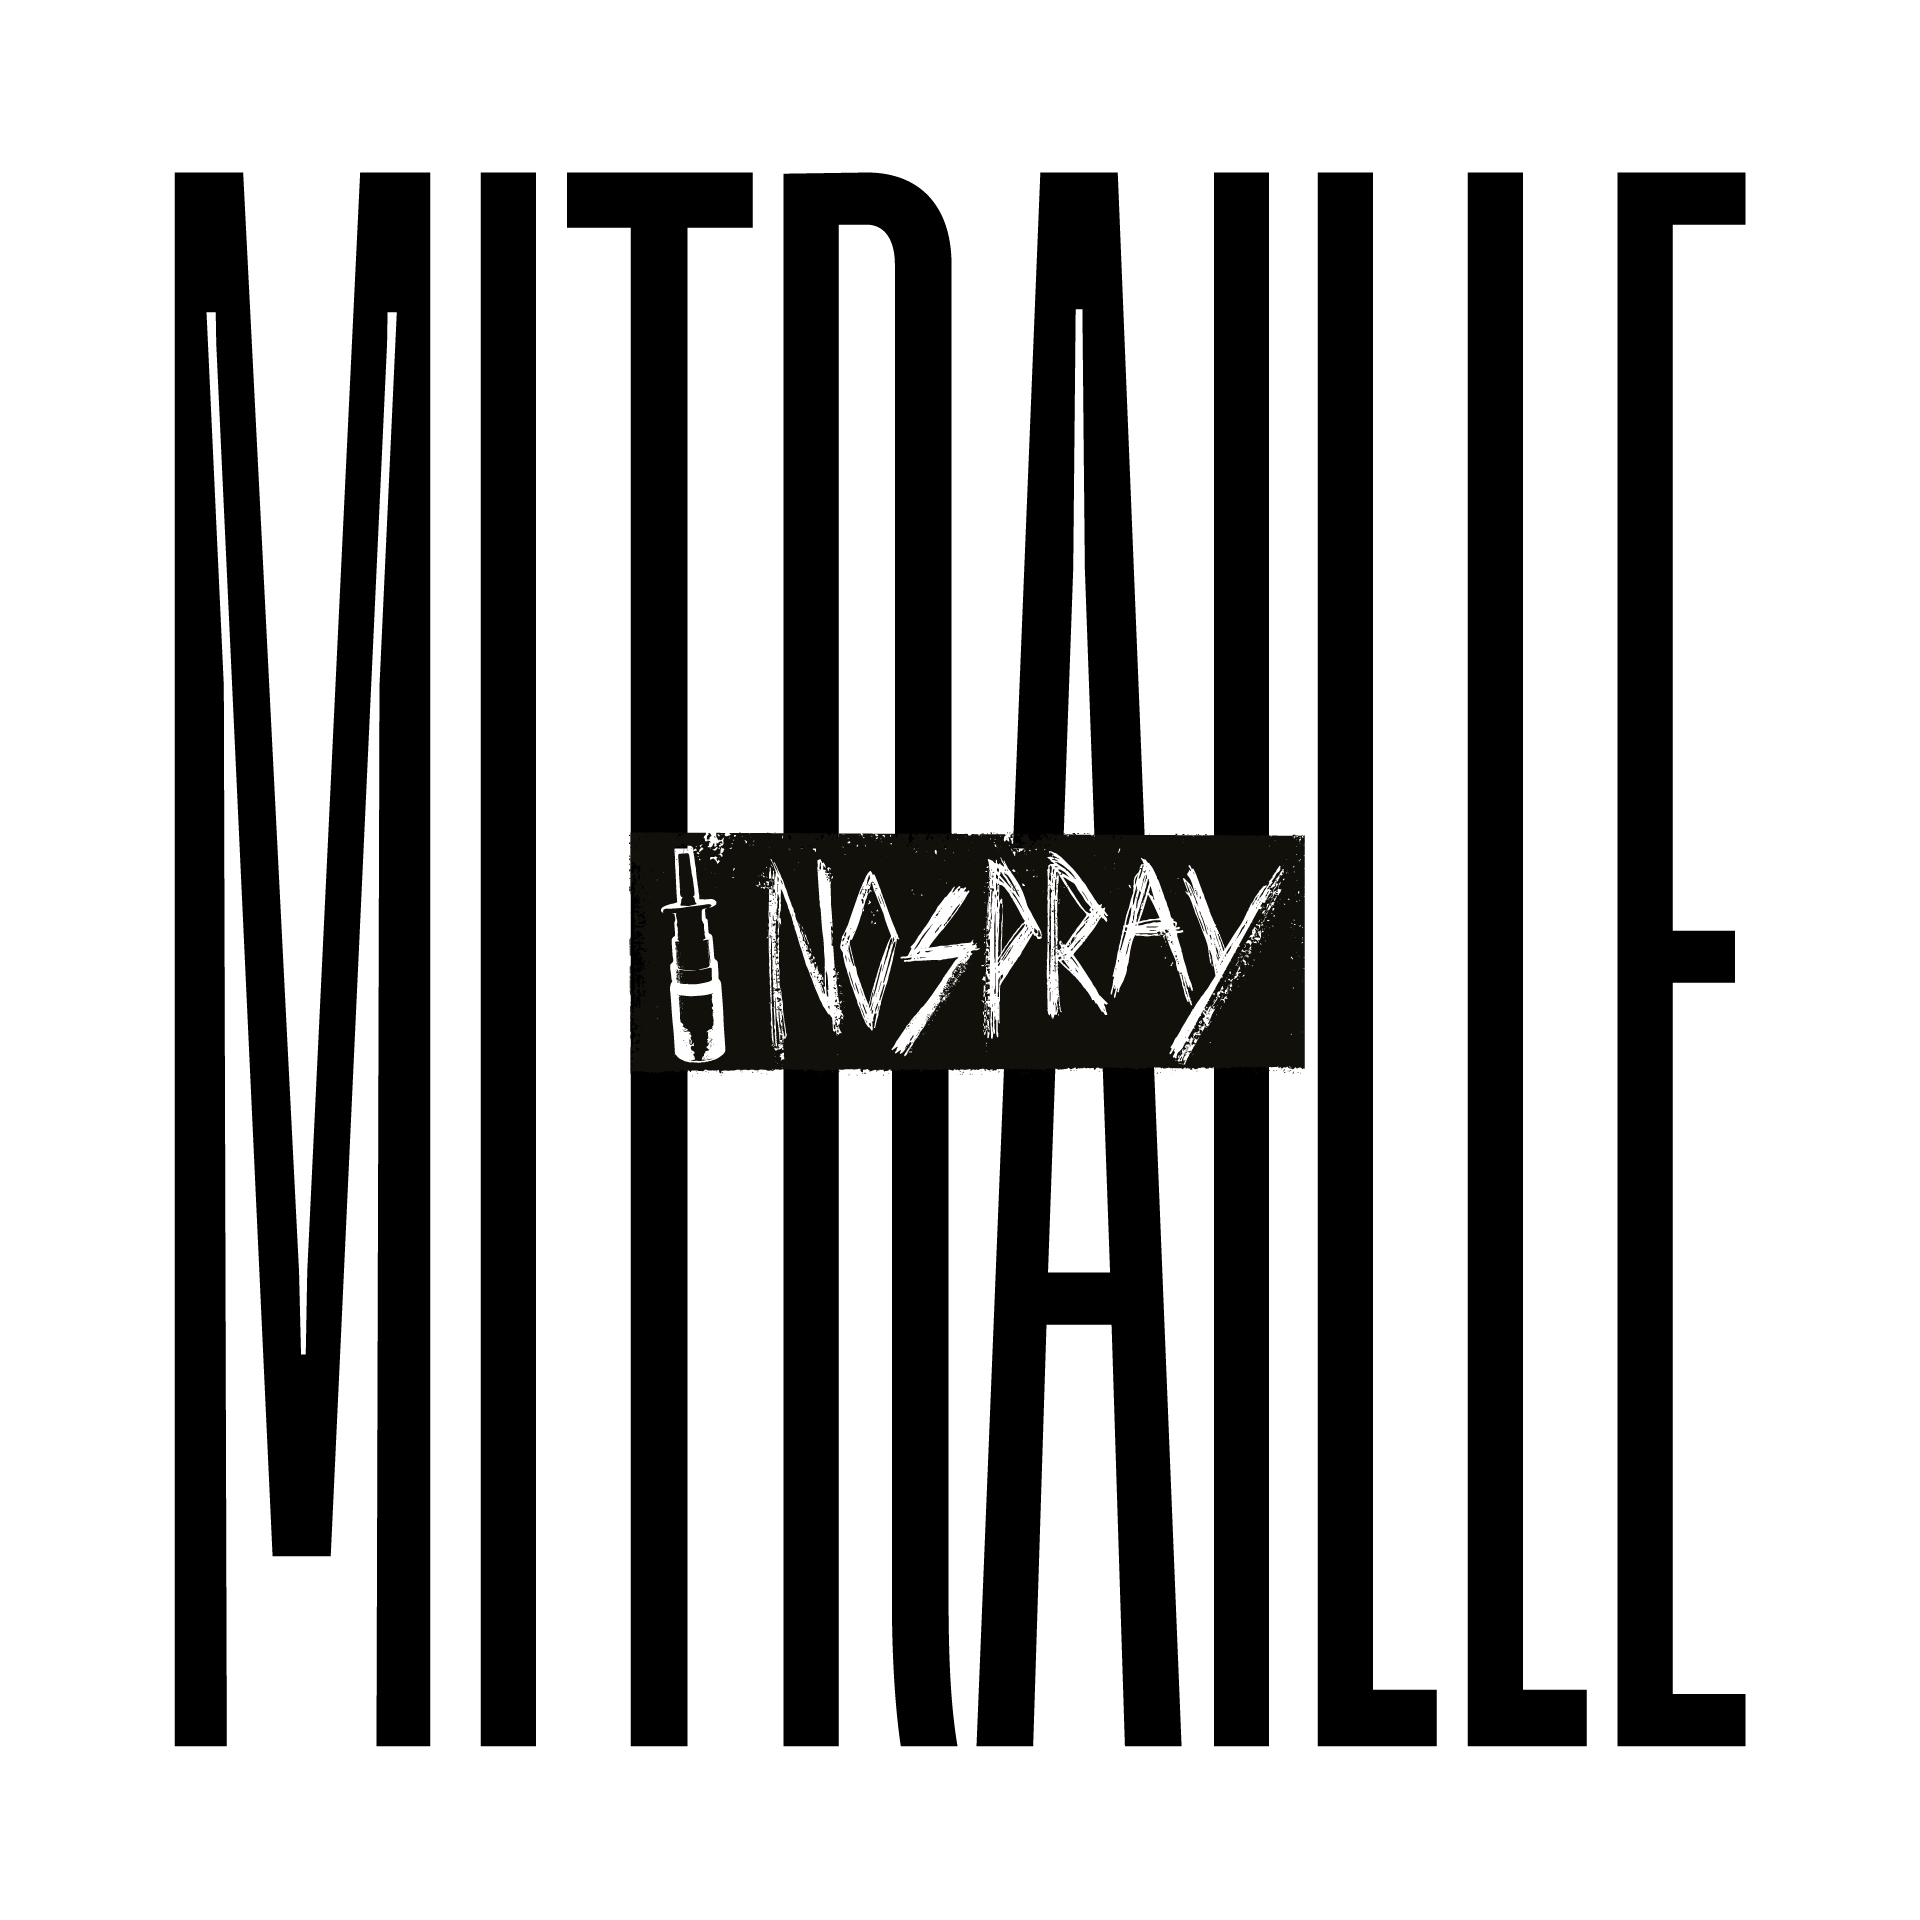 Mitraille (BE)